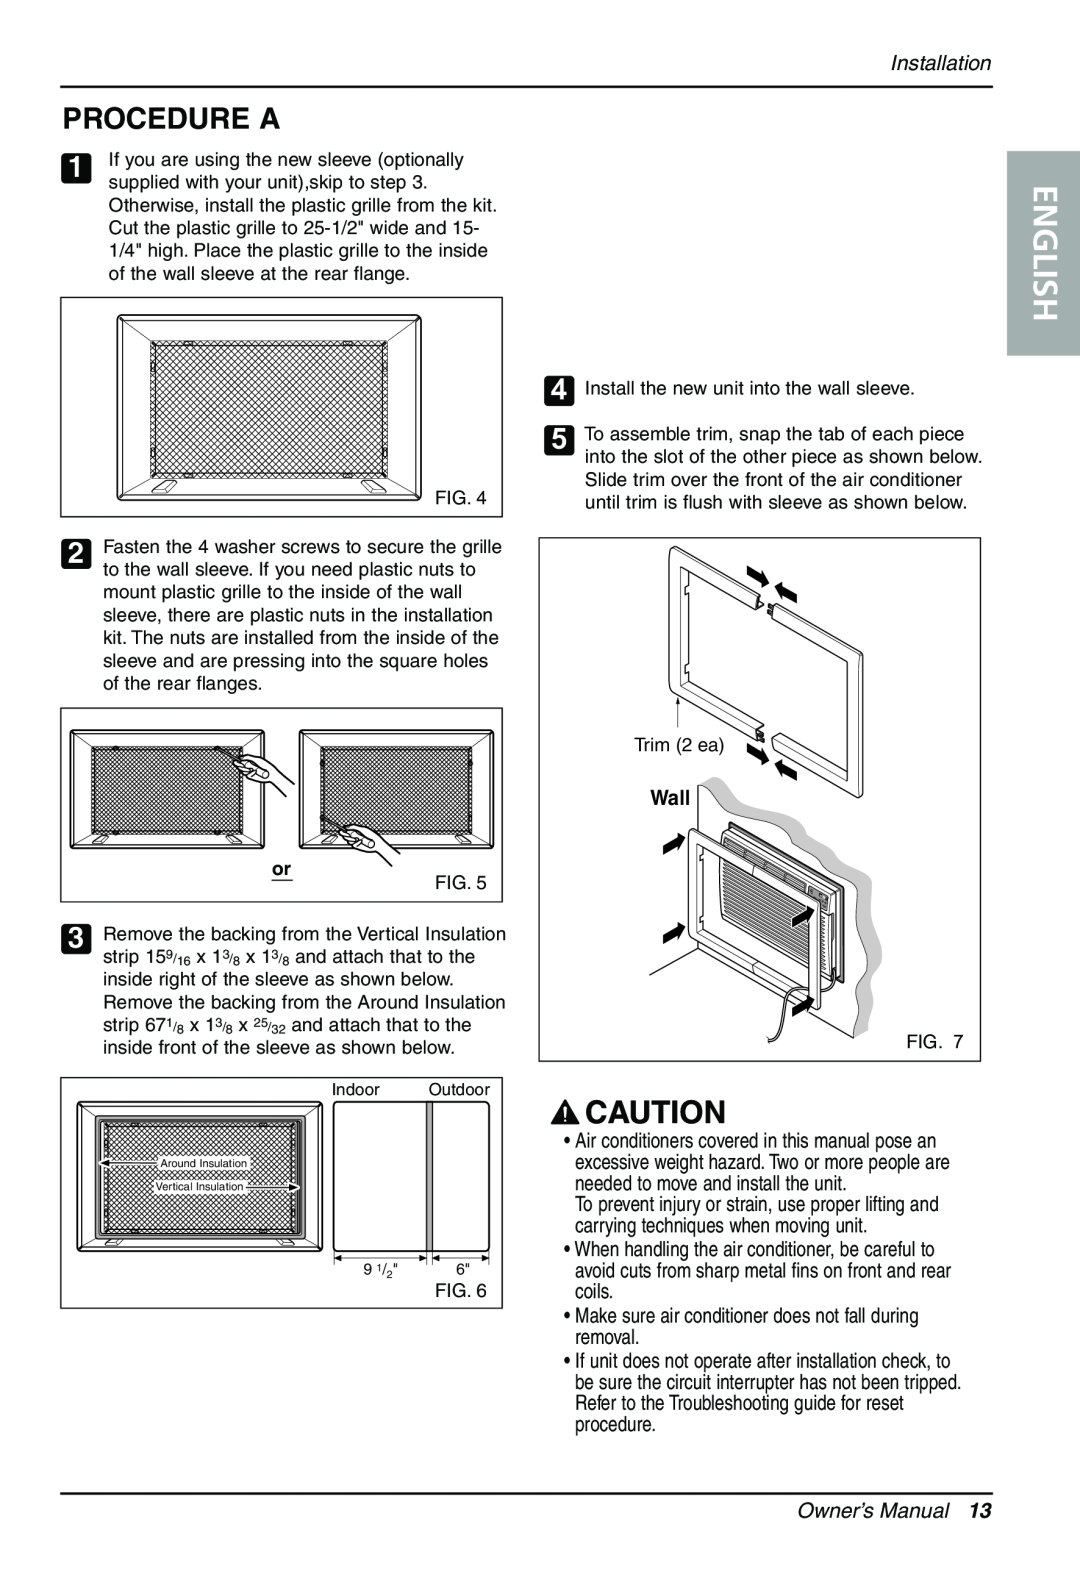 Sears LT103CNR manual Procedure A, English, Installation, Wall, Owner’s Manual, Install the new unit into the wall sleeve 